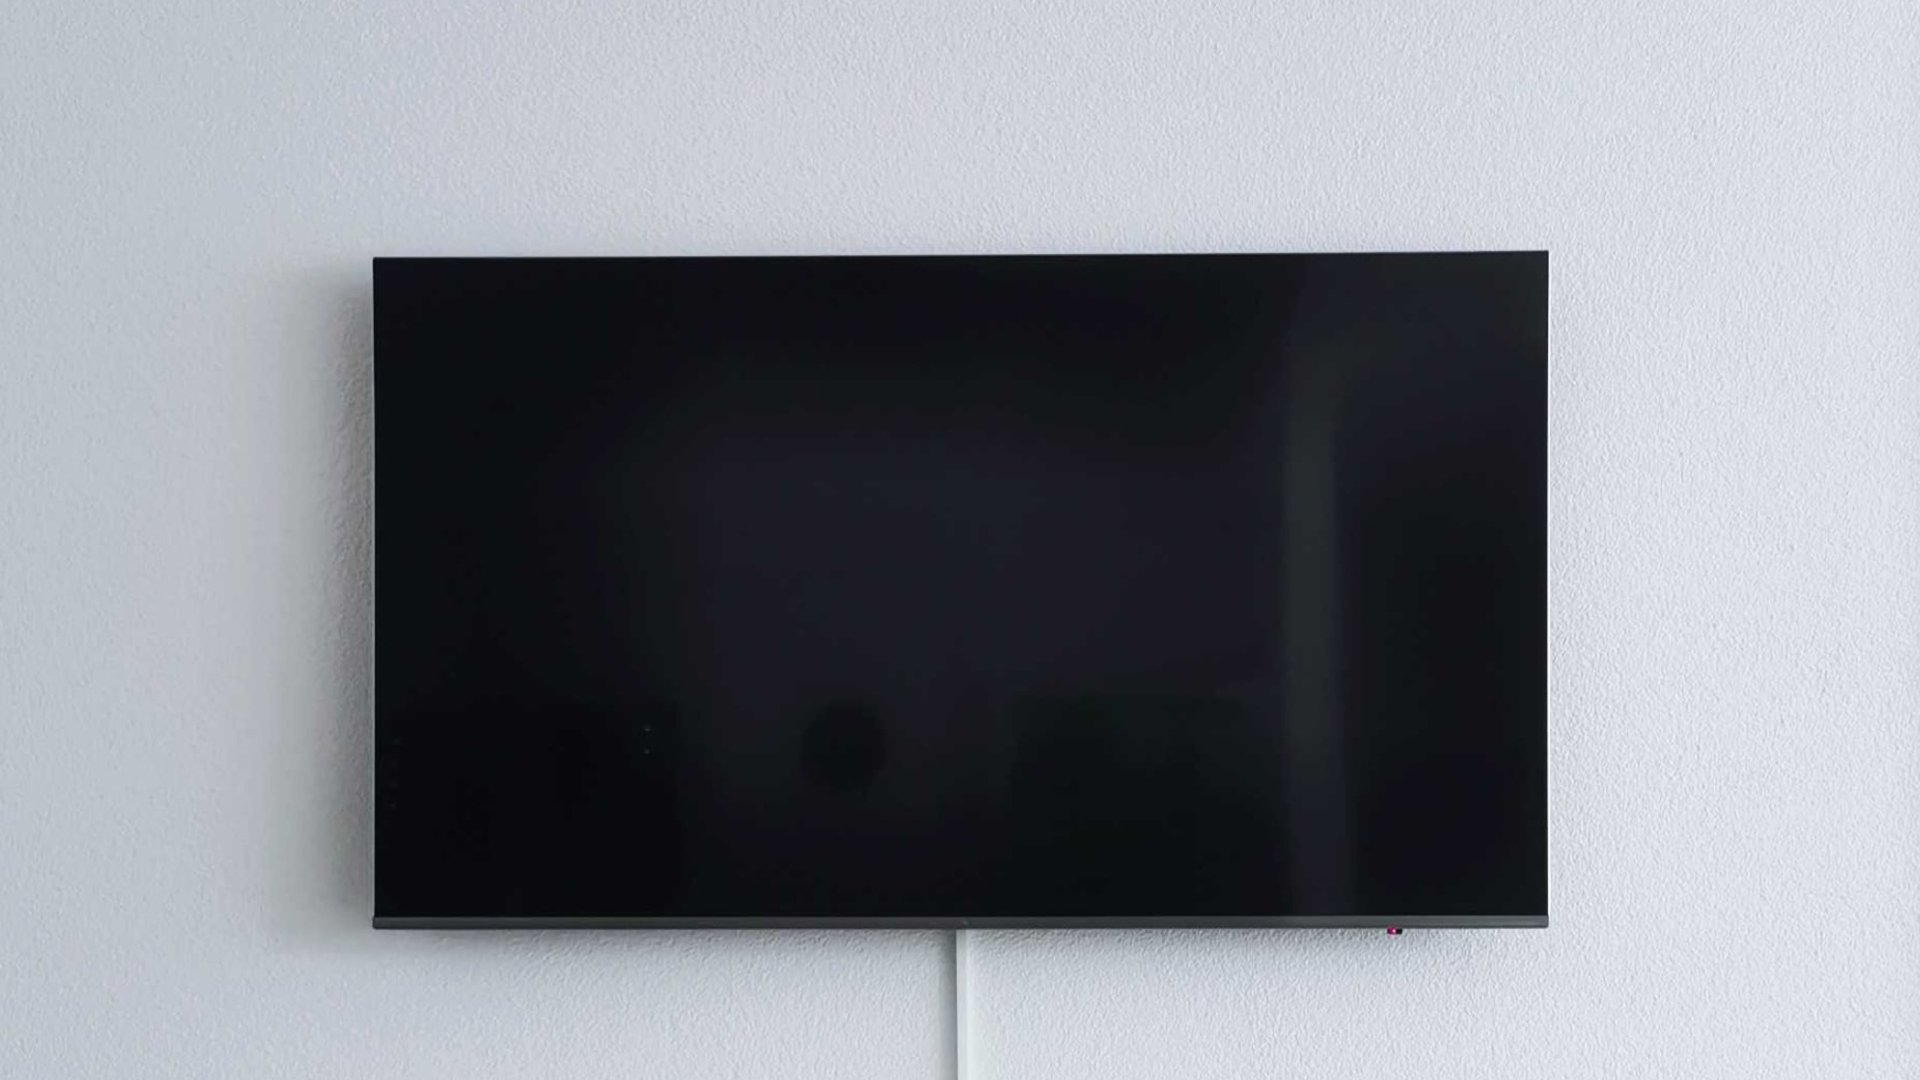 Android TV as Digital Signage